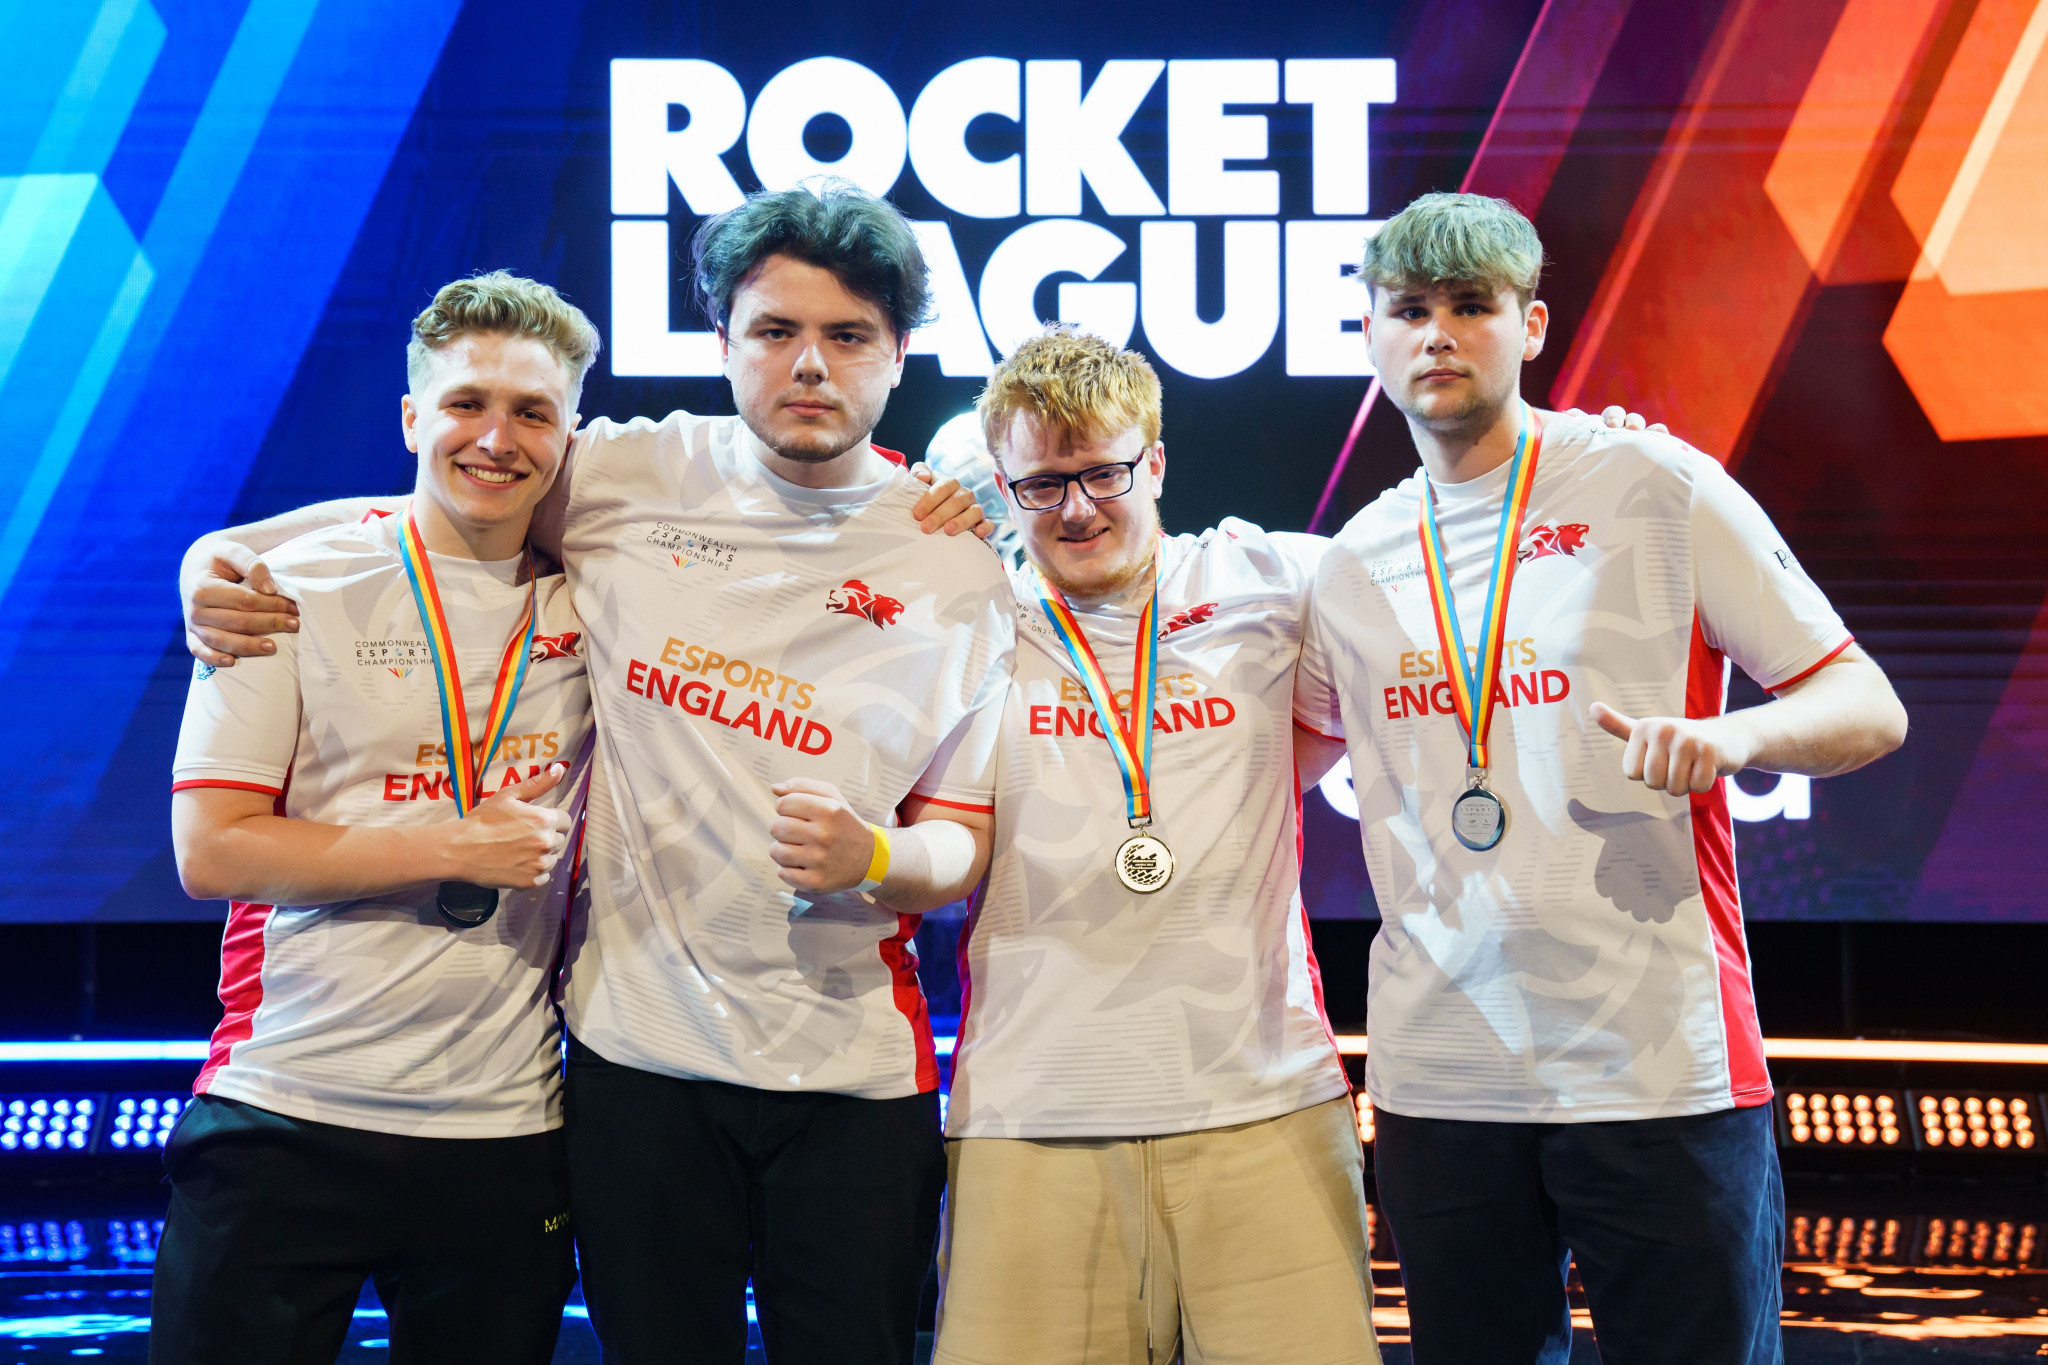 England were forced to settle for silver after being upset by Wales in the Rocket League open ©GEF